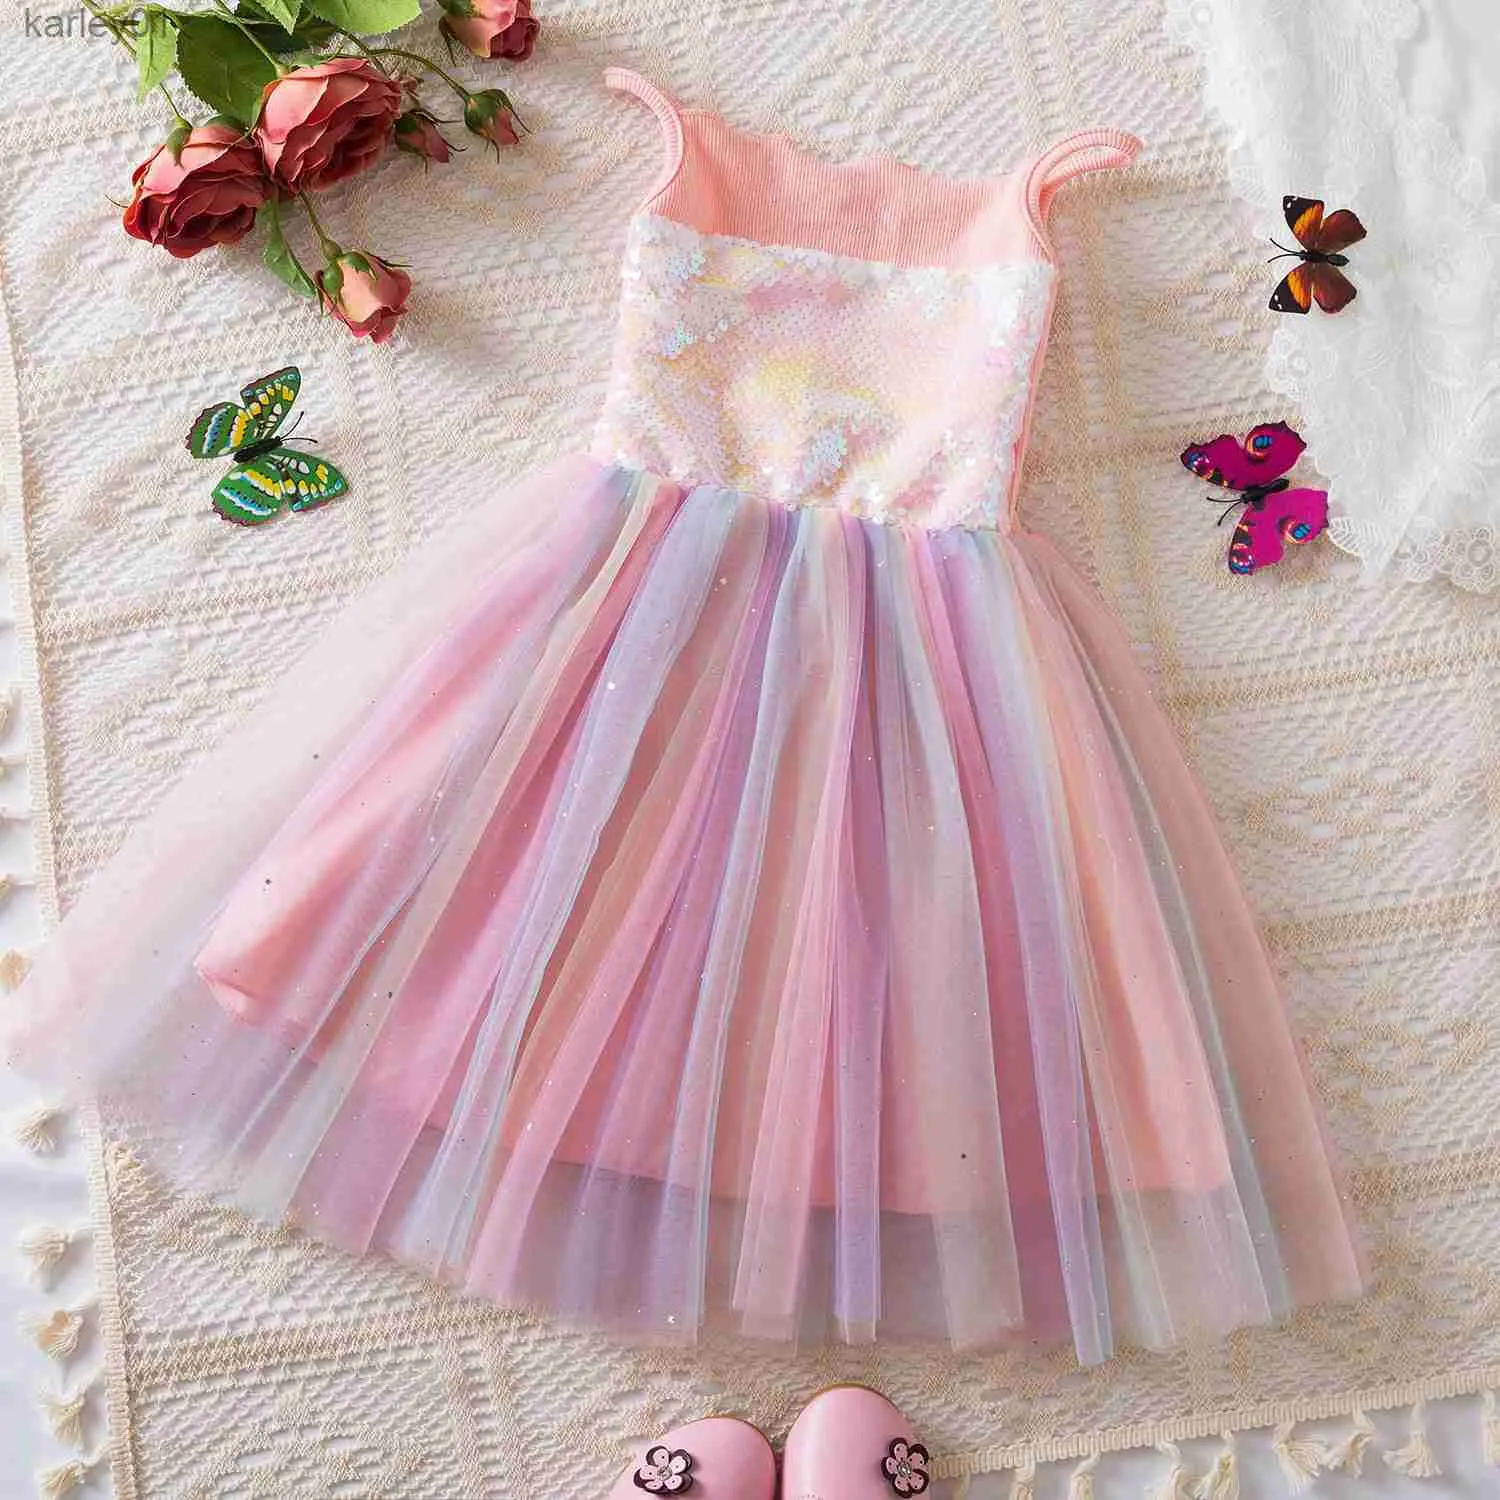 Girl's Dresses Sequin Baby Girl Dress for Summer Casual Kids Clothes 2 4 6 Yrs Suspender Sleeveless Birthday Party Princess Dress for Girls yq240327